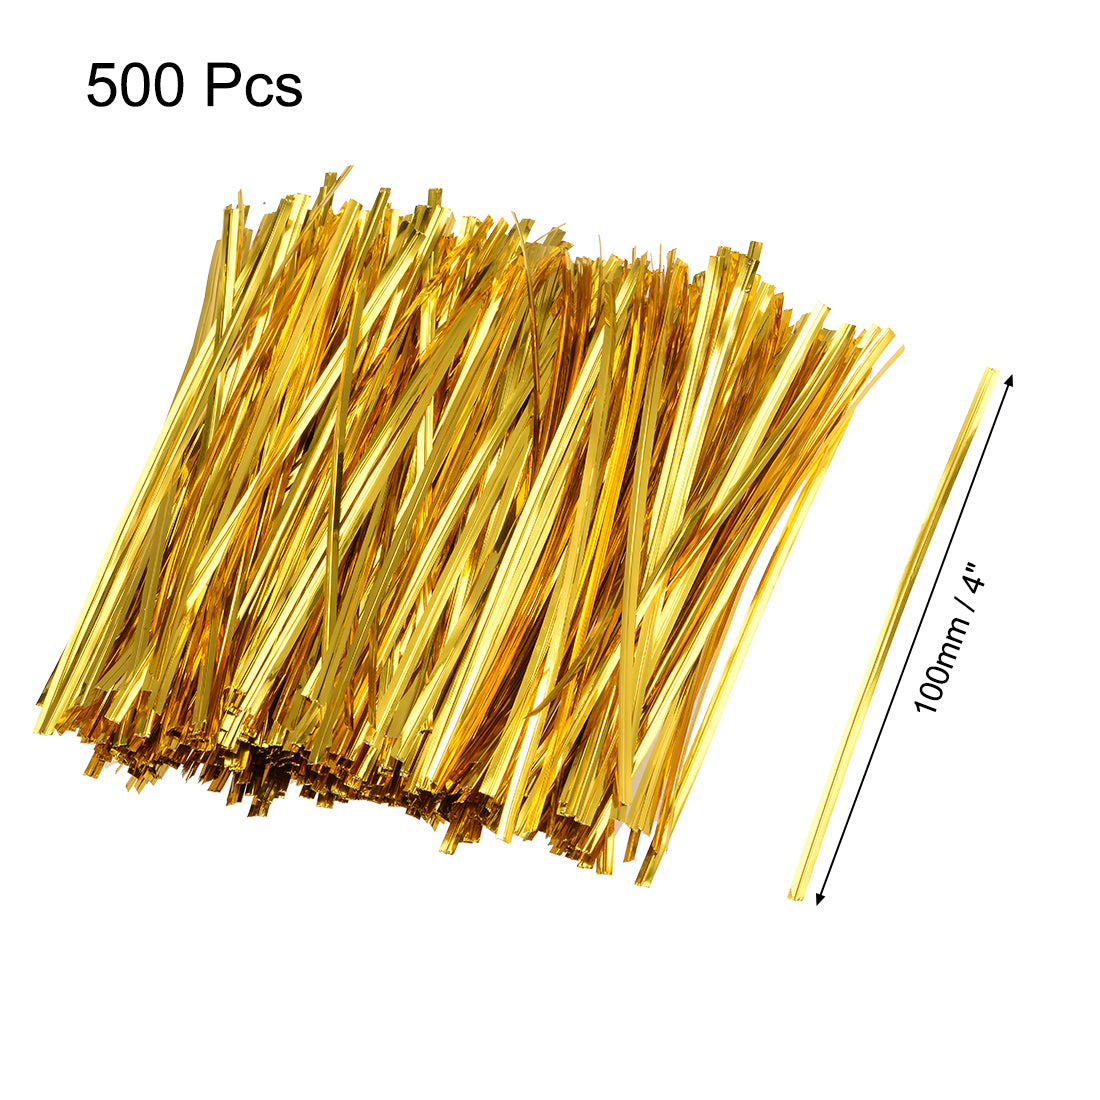 uxcell Uxcell Long Strong Twist Ties 4 Inches Quality Plastic Closure Tie for Tying Gift Bags Art Craft Ties Manage Cords Golden 500pcs